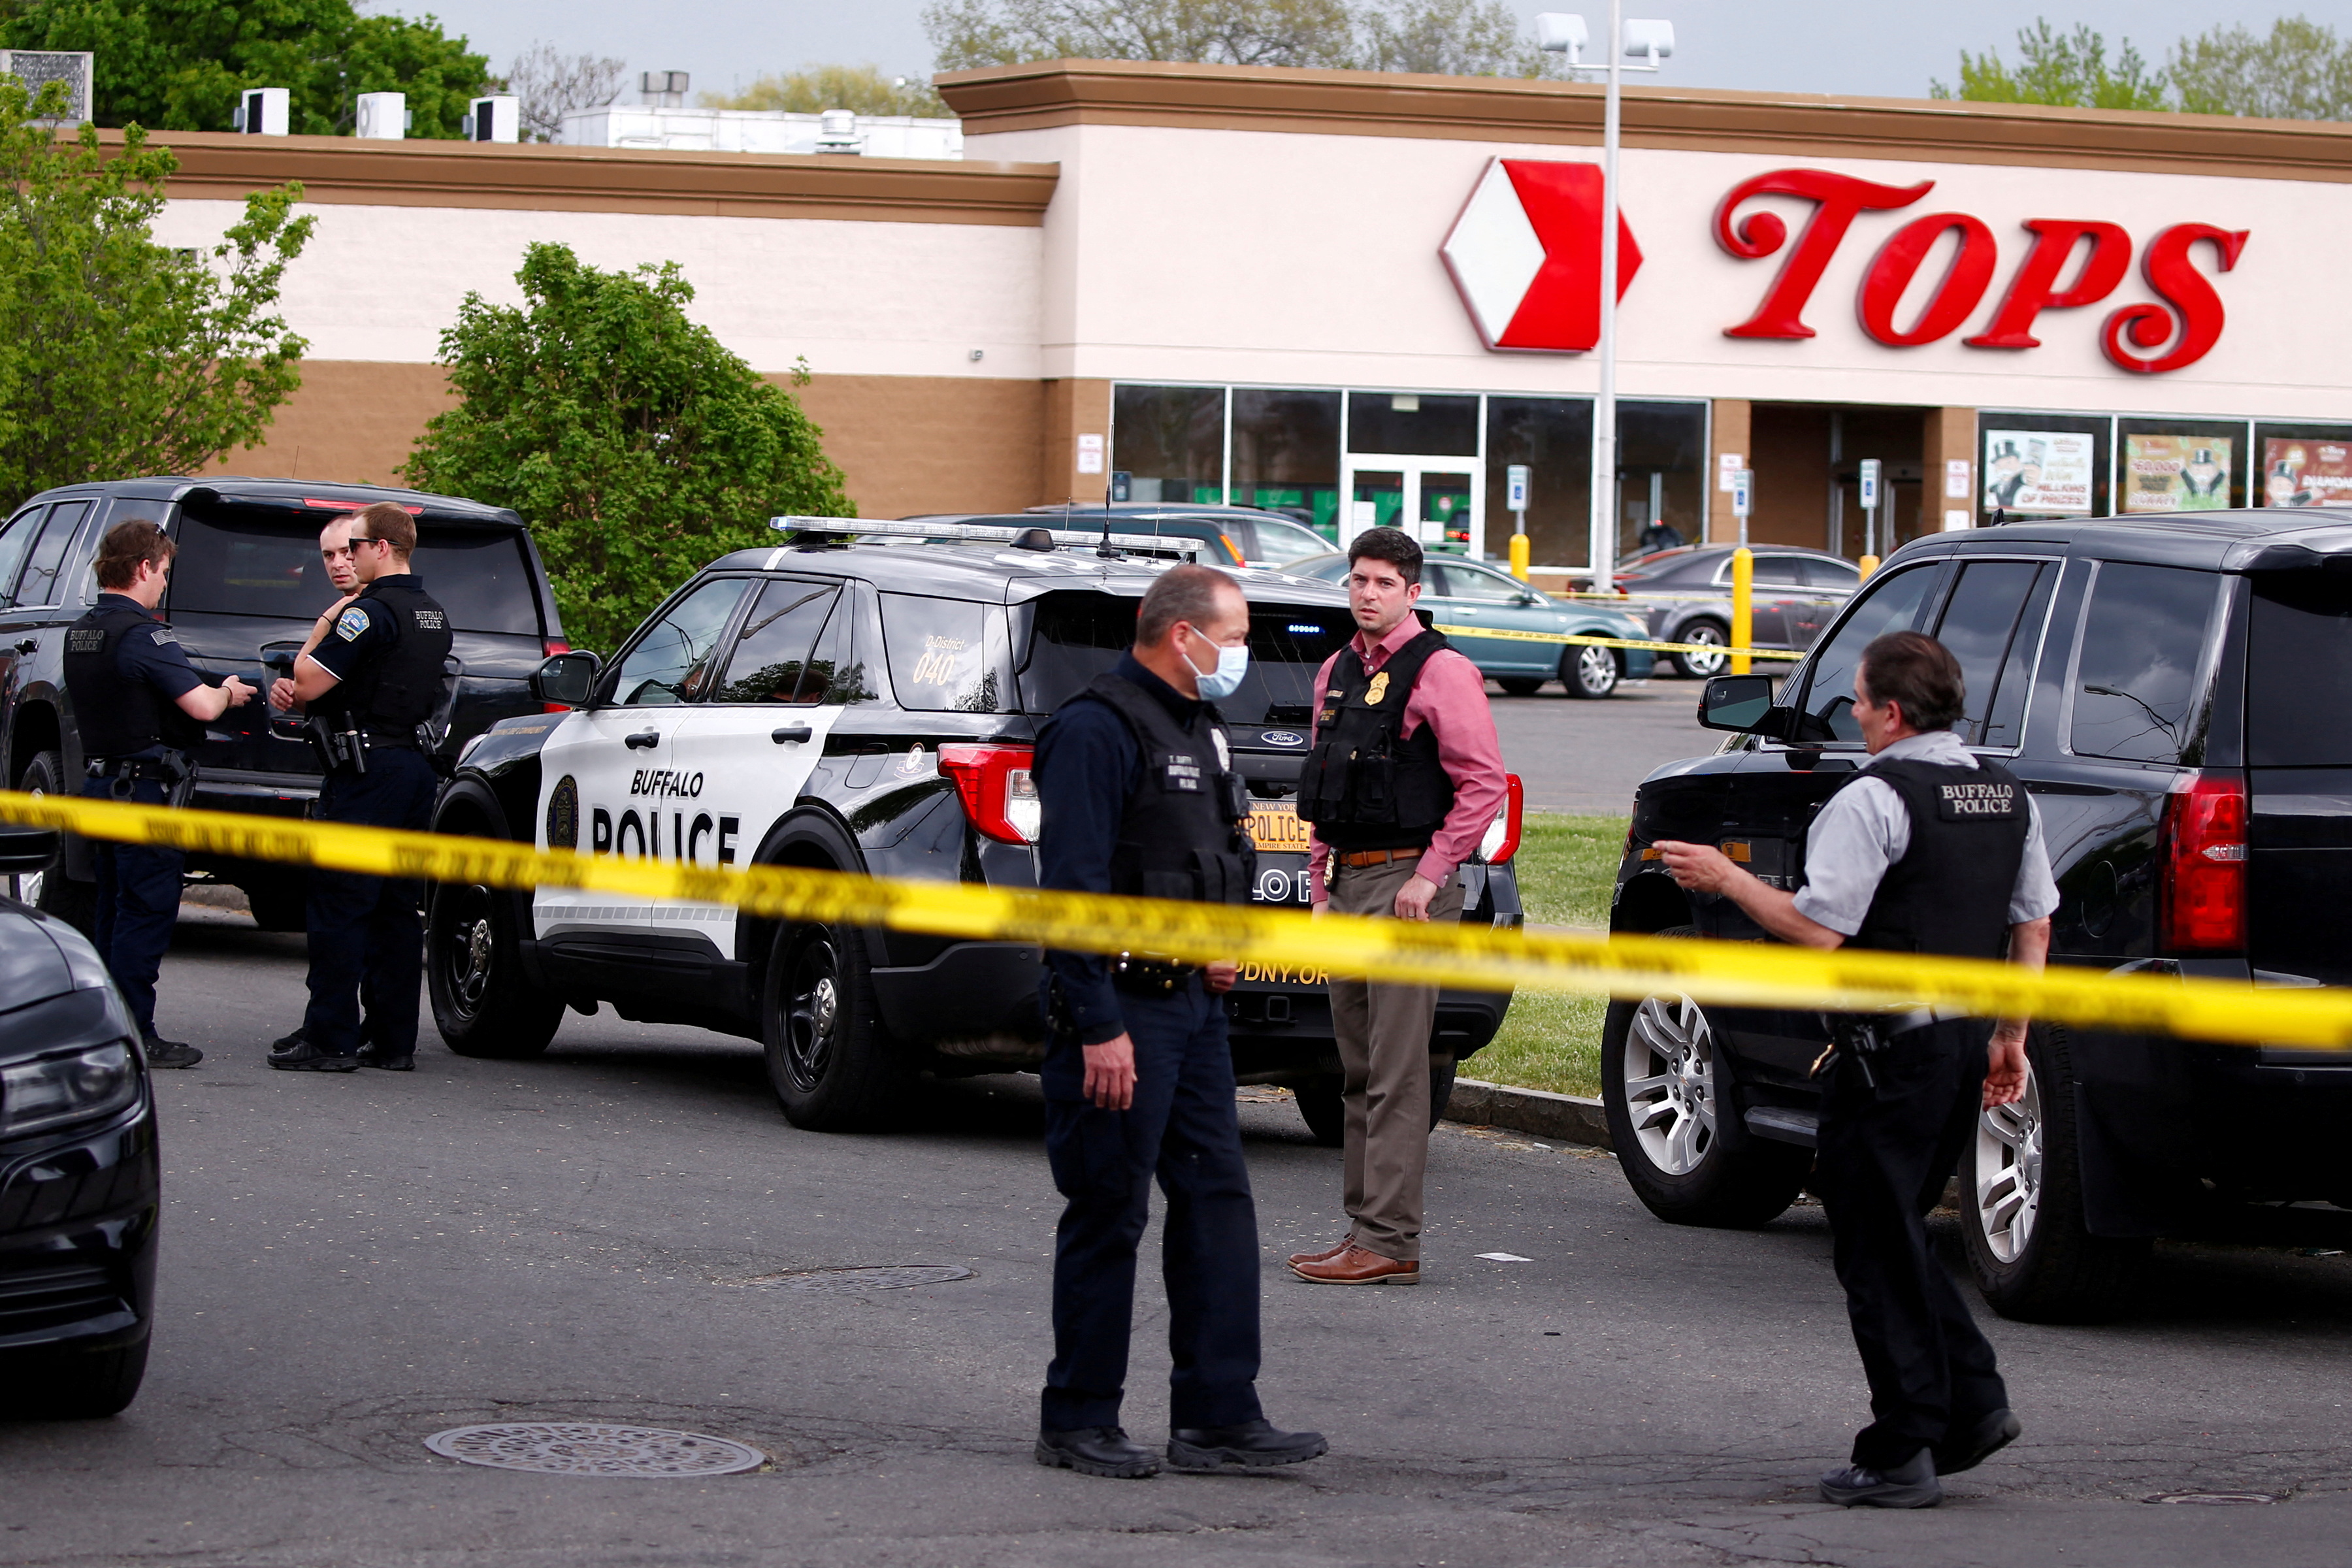 Police officers secure the scene after a shooting at TOPS supermarket in Buffalo